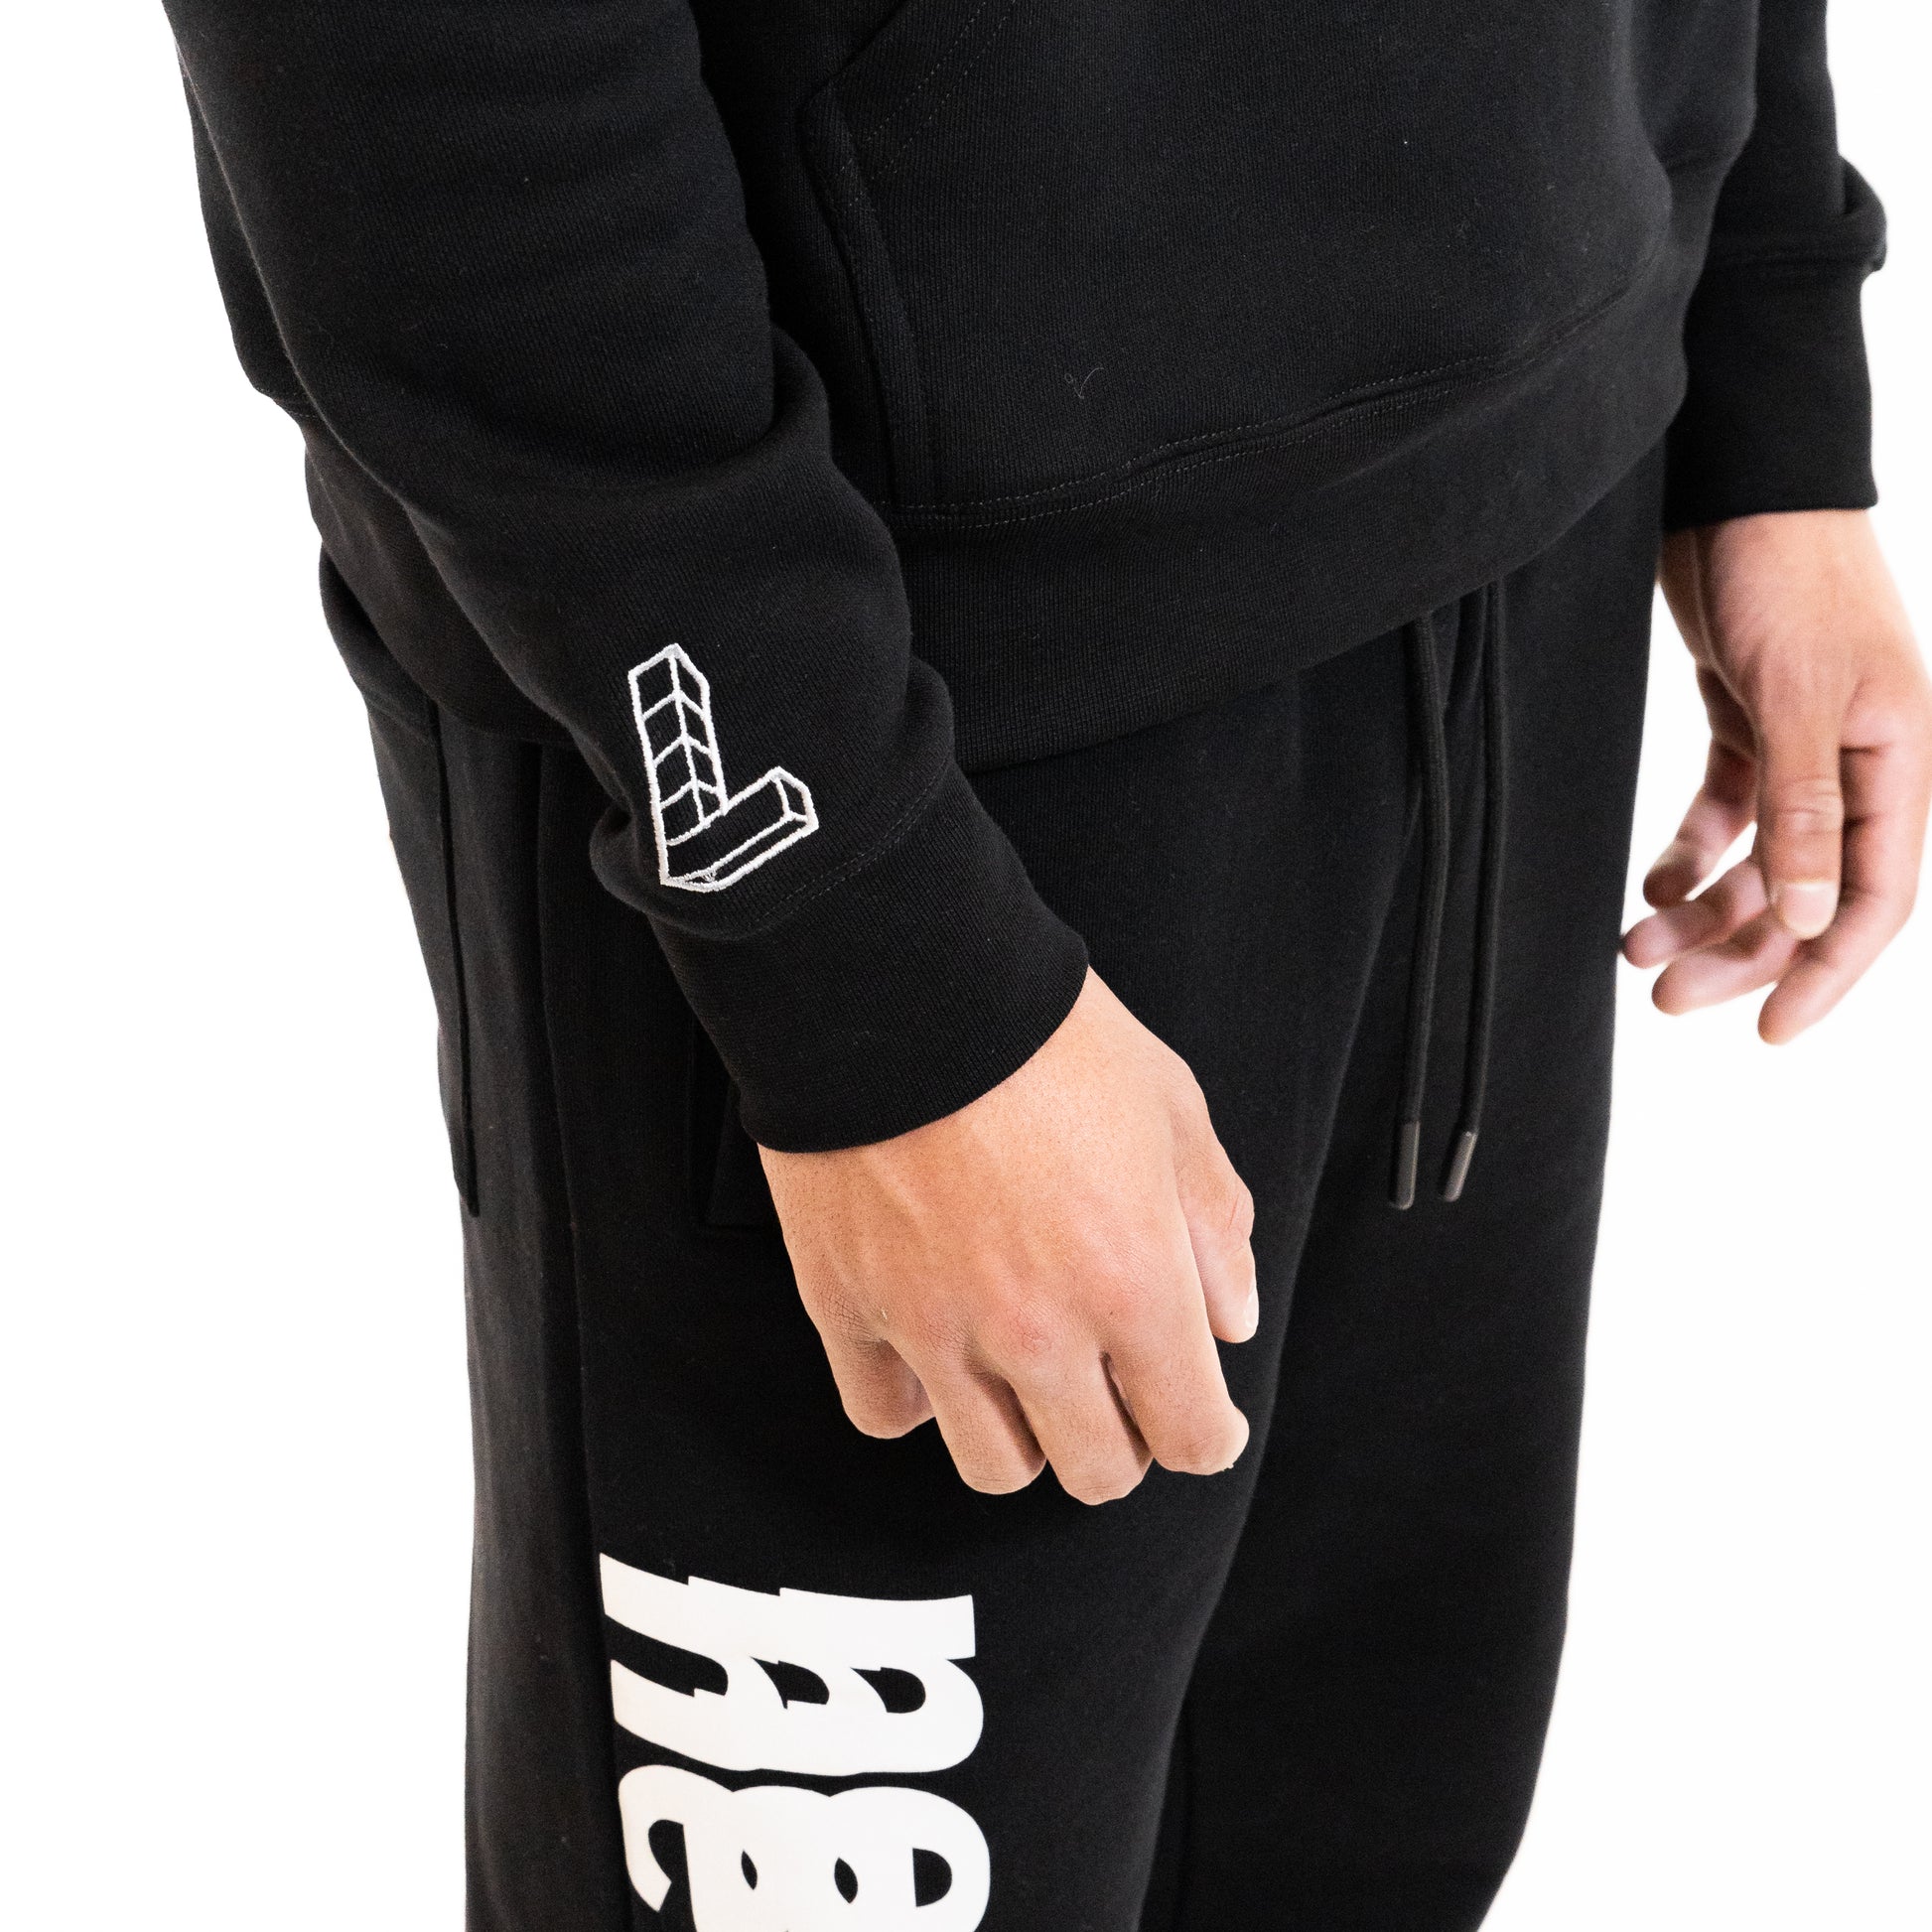 Flying Duck Hoodie, Black/Reflective - Layr Official